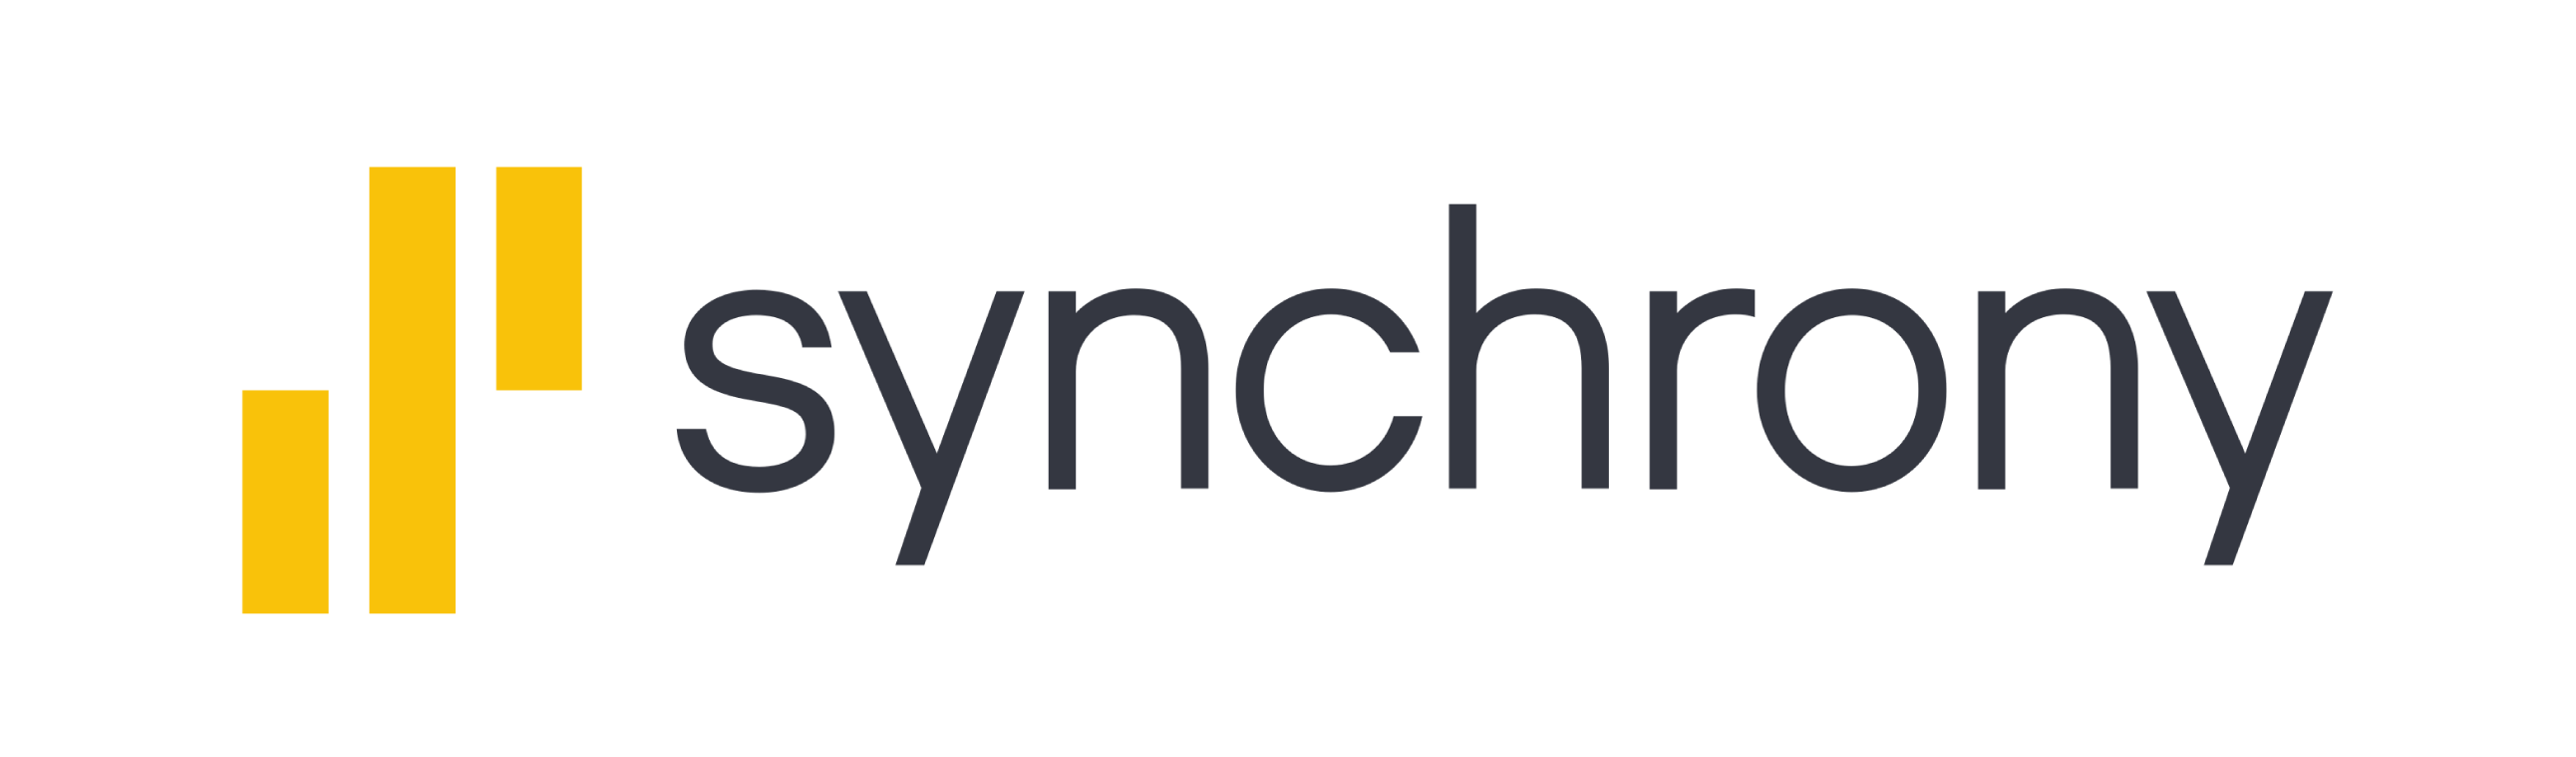 Synchrony Financing: Experience 6-60 months of promotional financing and exclusive offers for cardholders, subject to credit approval. Click the "Apply Now" button to be redirected to the Synchrony page and apply for financing online.